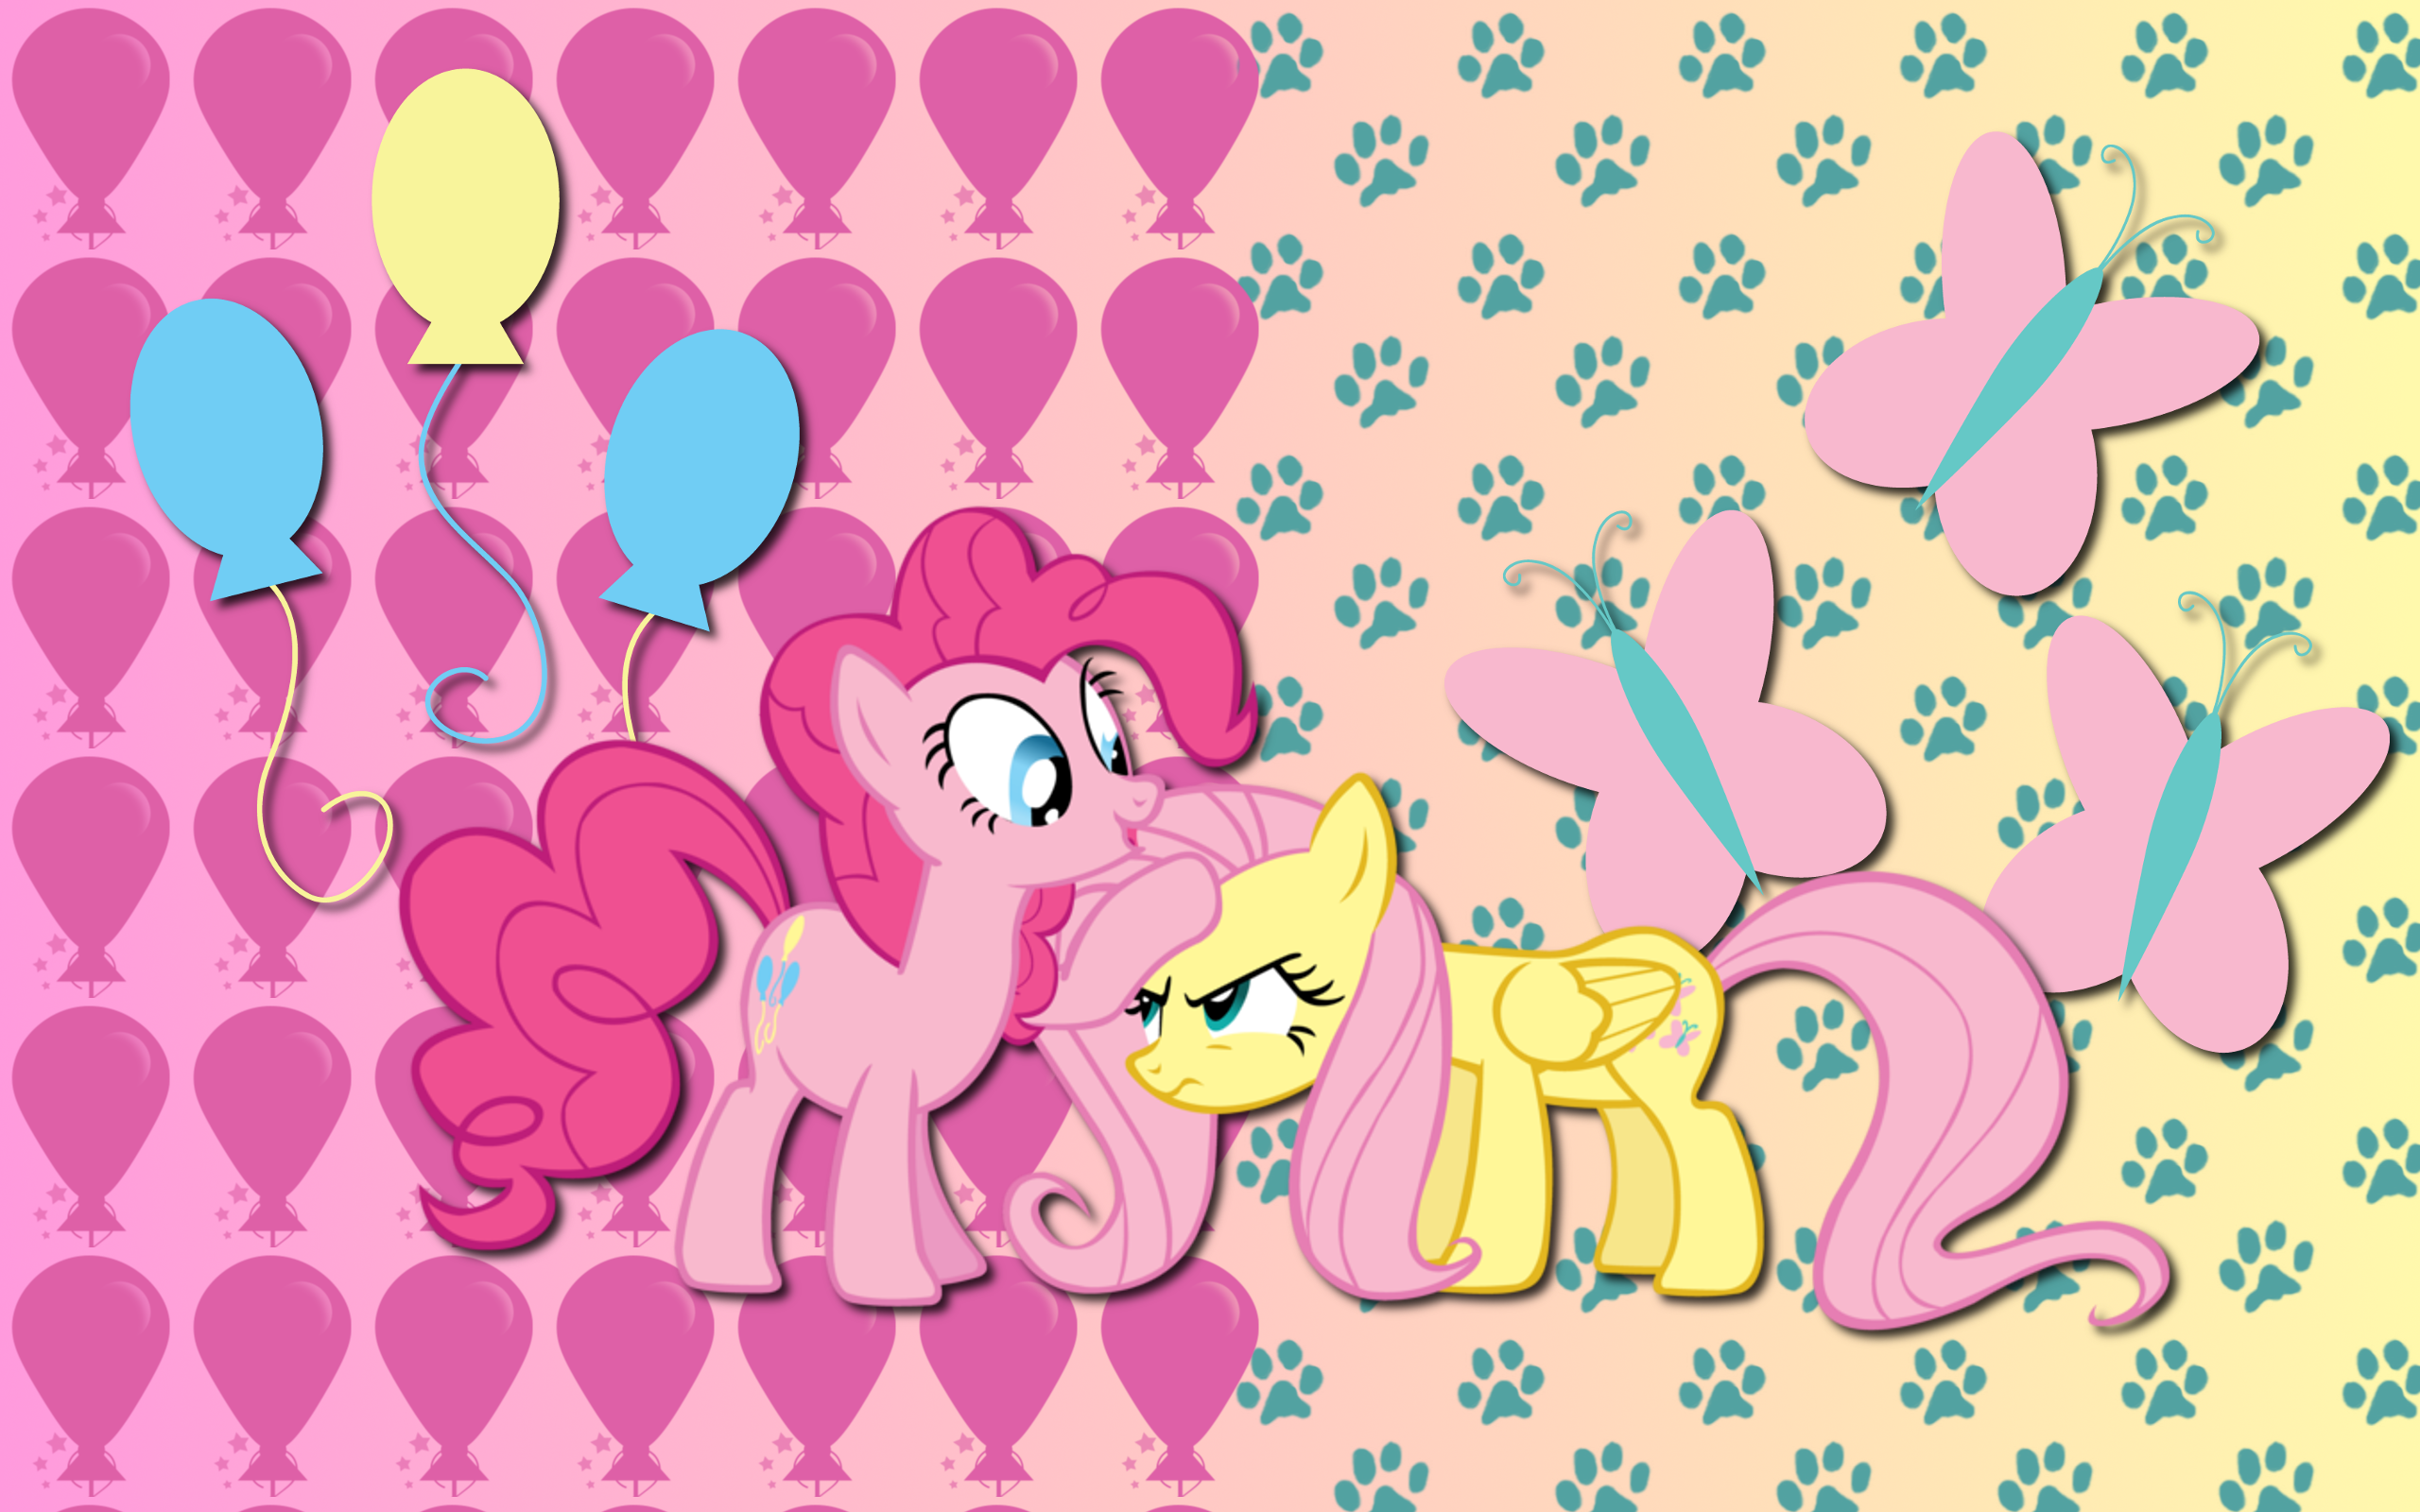 Pinkie Shy wallpaper by AliceHumanSacrifice0, dropletx1 and ooklah